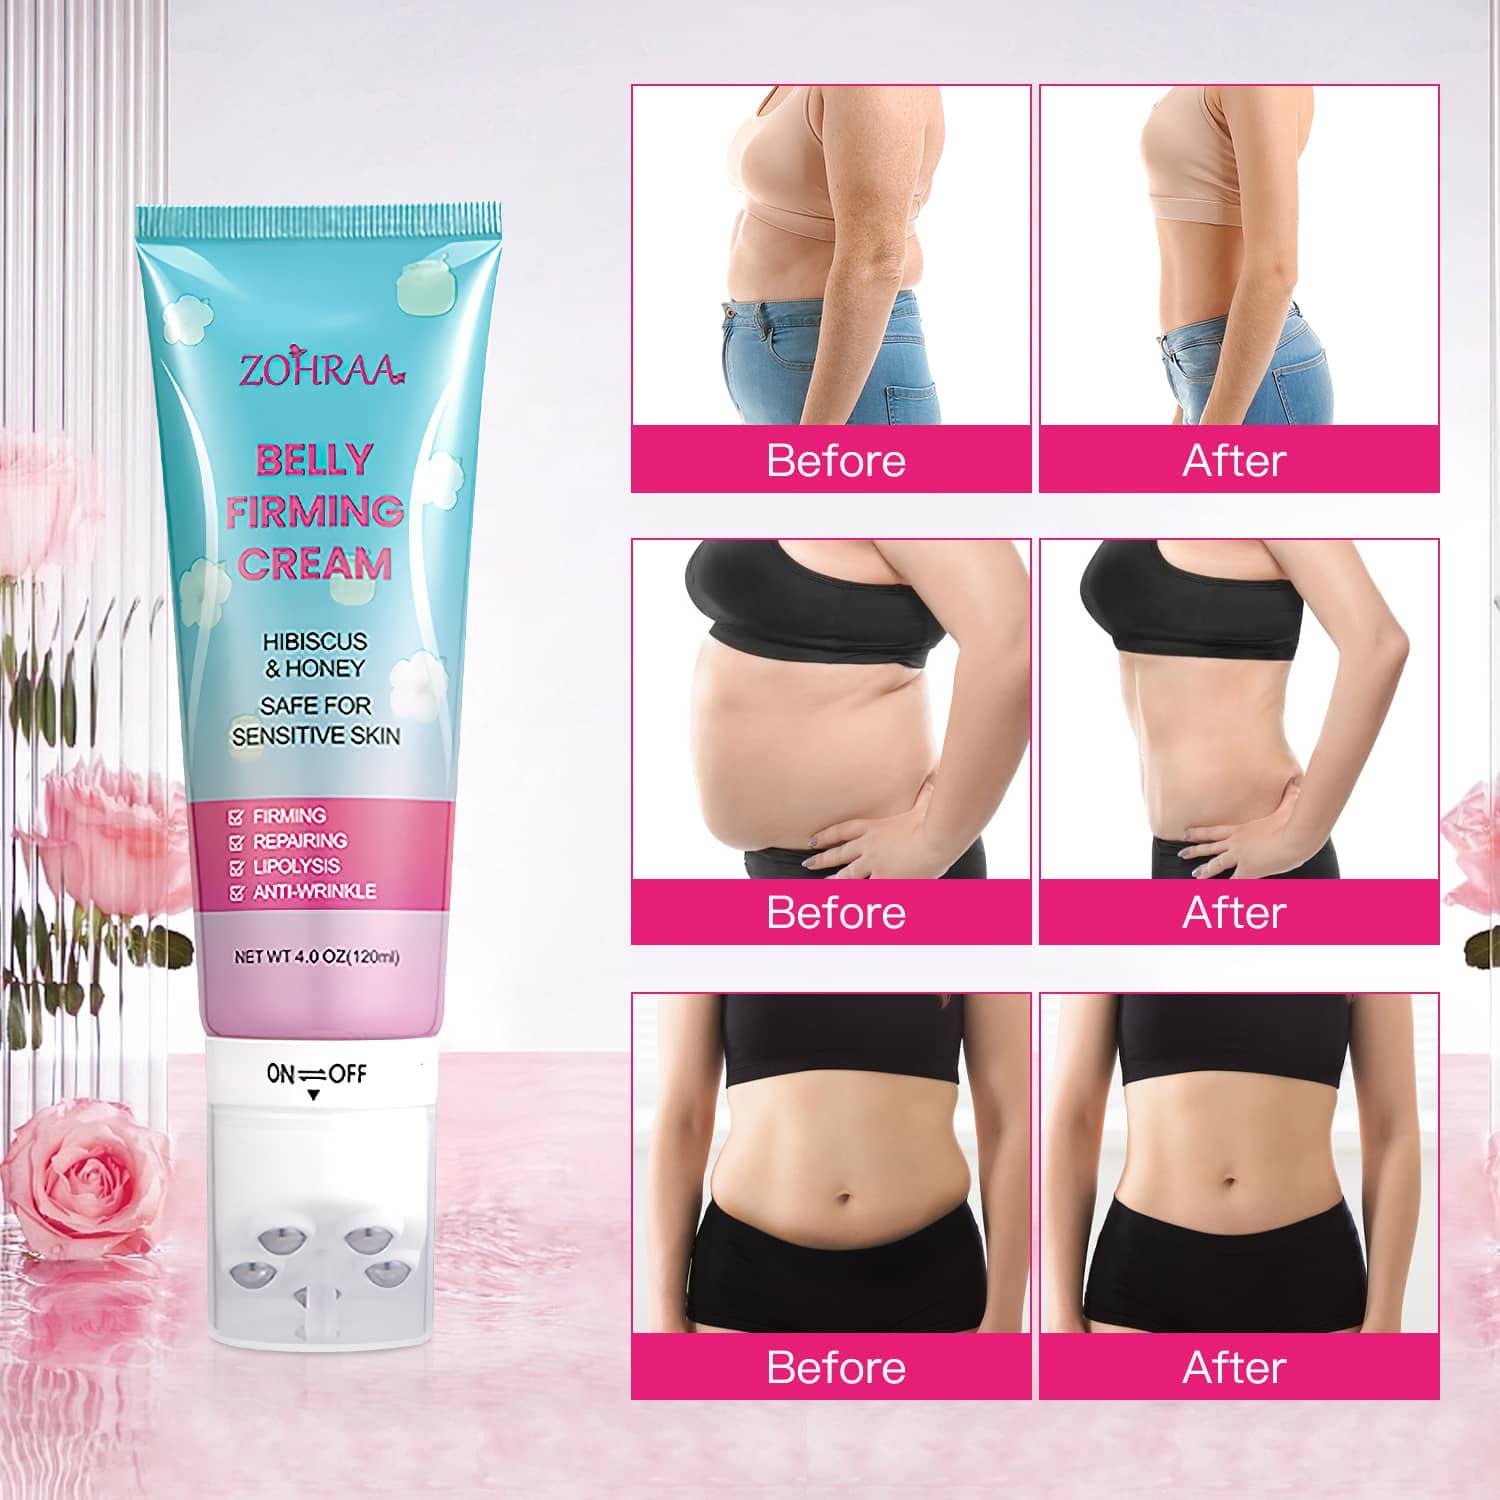 ZOHRAA Hibiscus and Honey B Flat Belly Firming Cream - Skin Tightening Cream for Stomach, Thighs  Butt, Moisturizing Firming Cream for Women and Men(Cream + Massager)